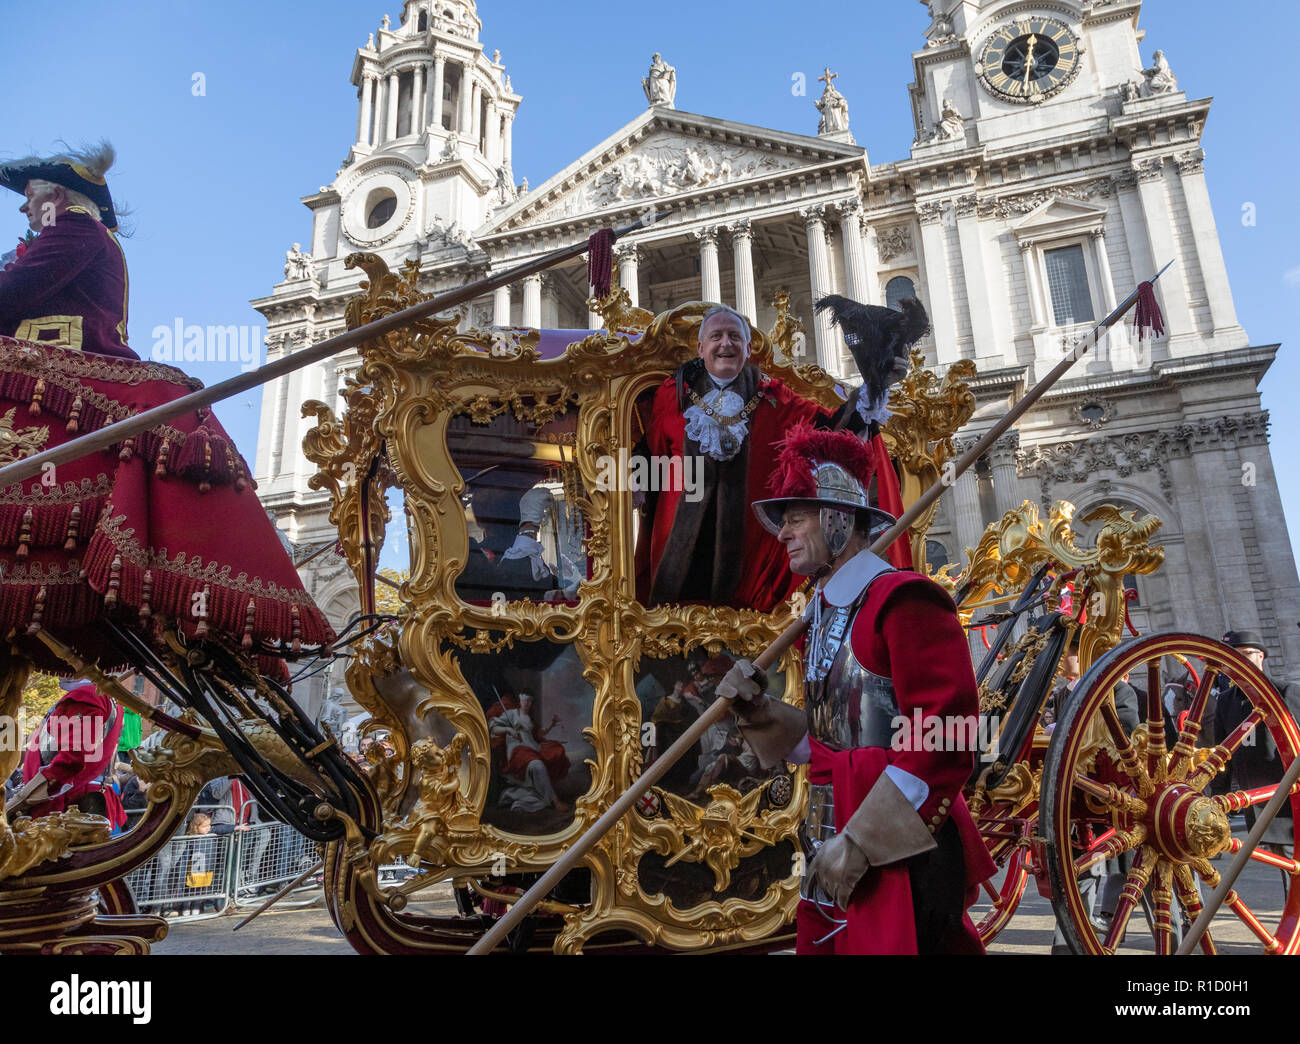 London, UK. 10 Nov, 2018. The procession for the Lord Mayor's Show  marks the swearing in of the newly elected Lord Mayor of London. This year it is P Stock Photo